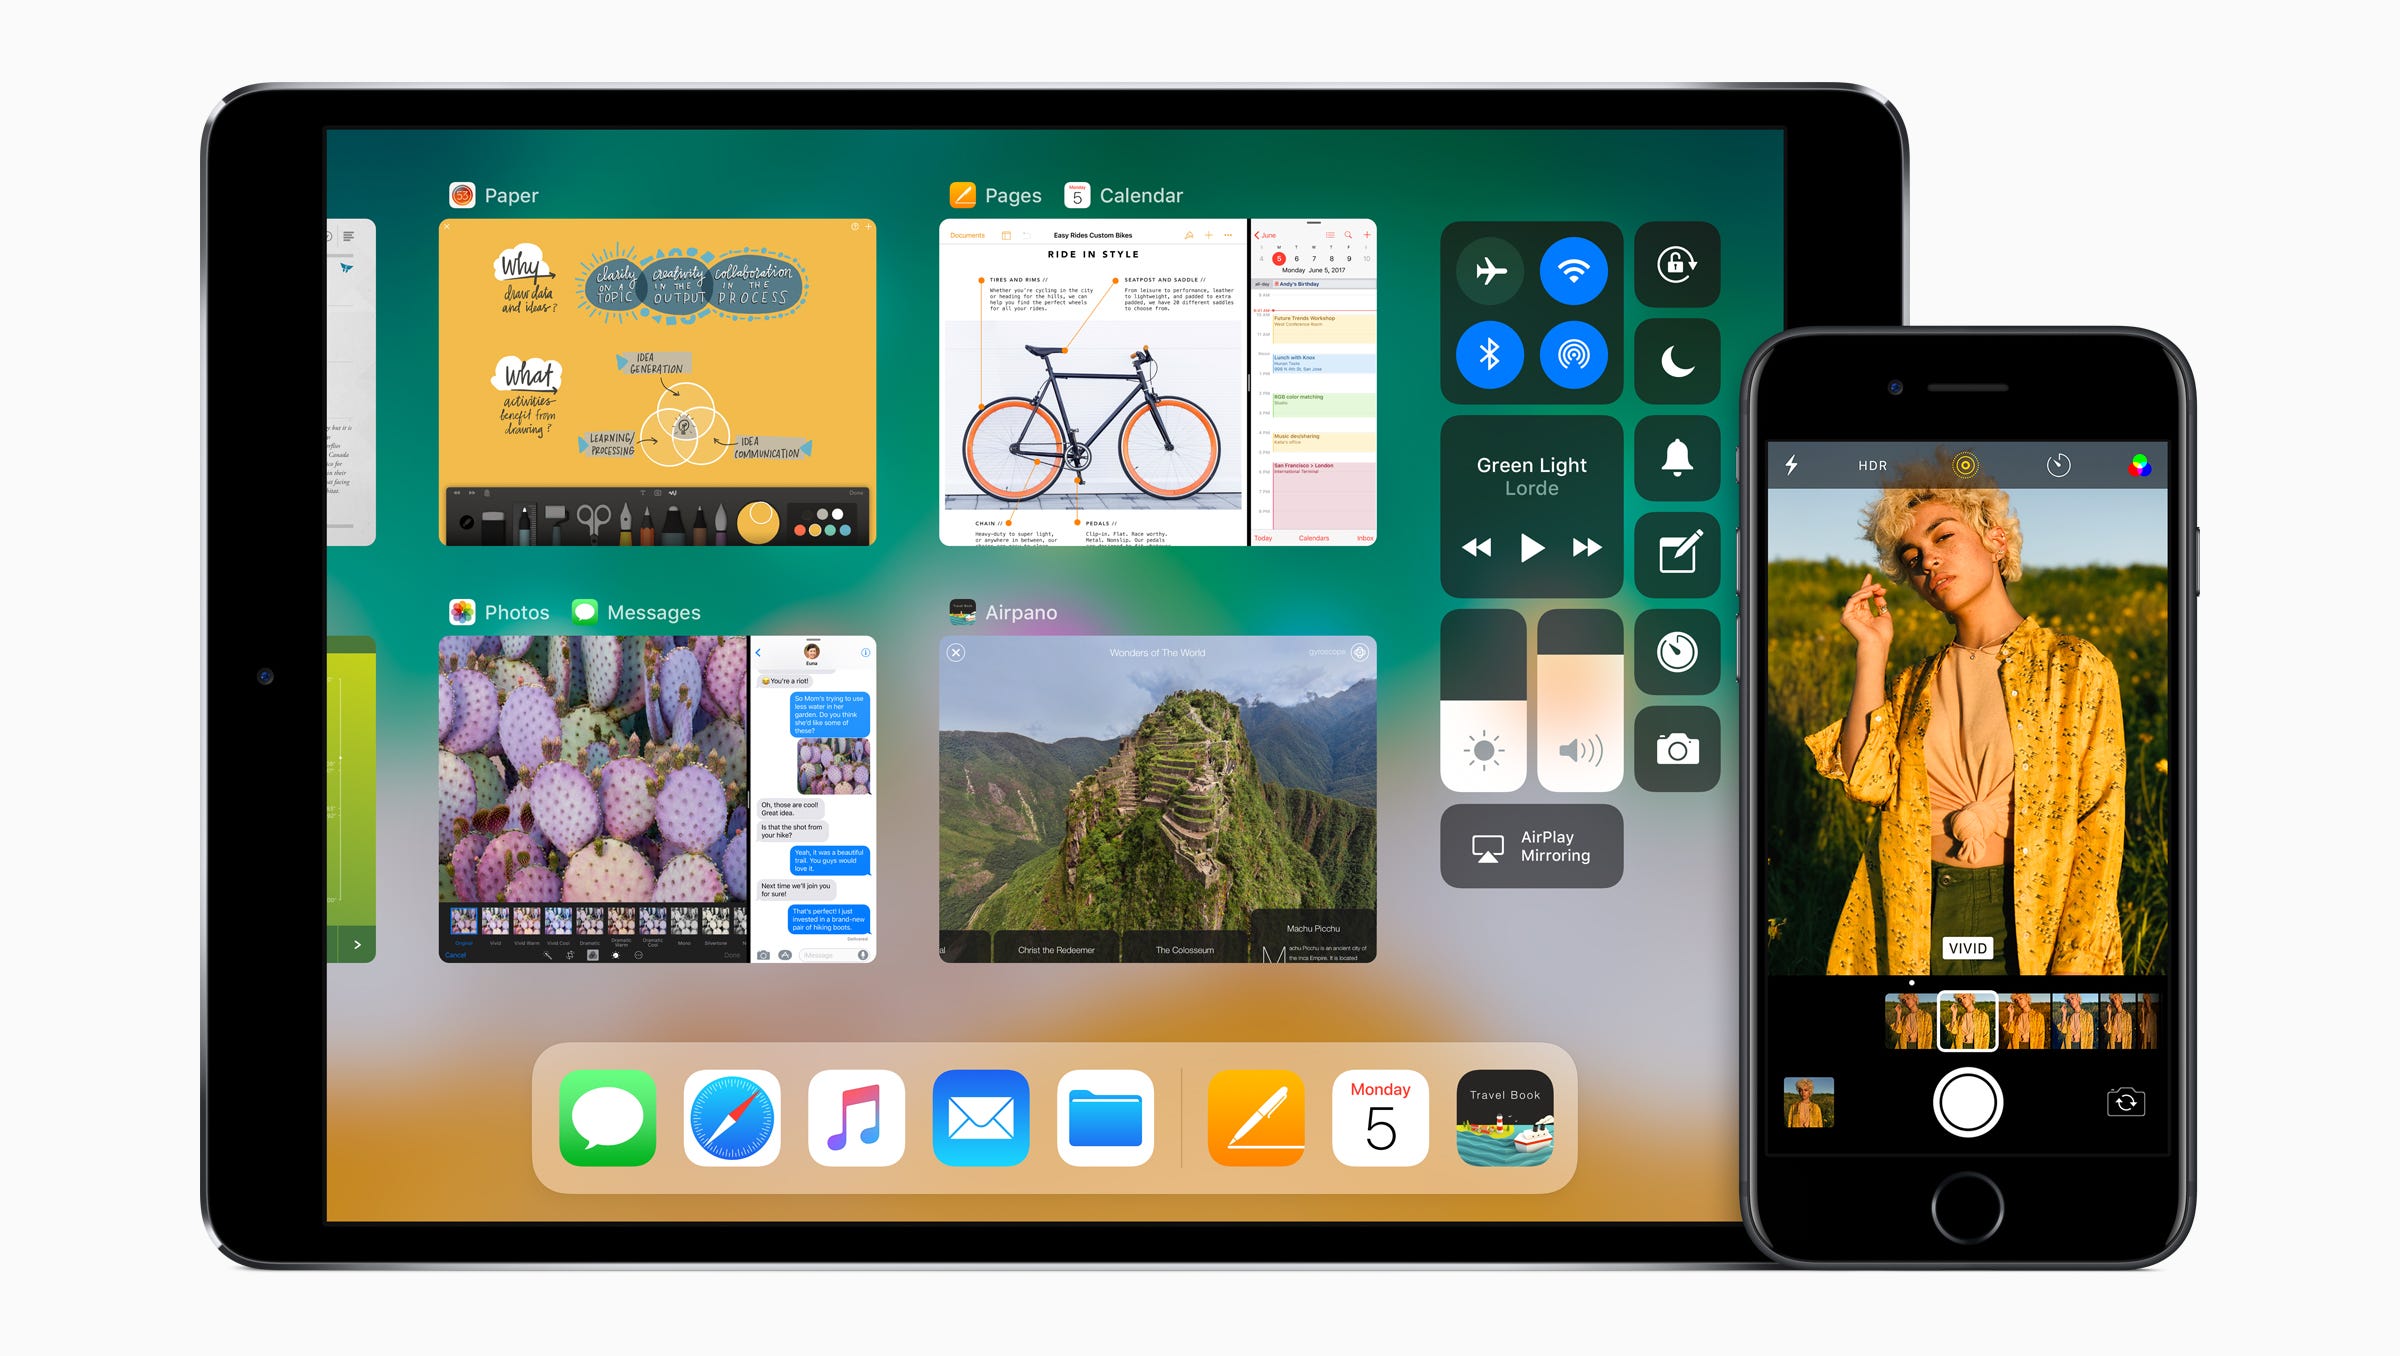 Both the iPad and iPhone get Apple's attention in iOS11.